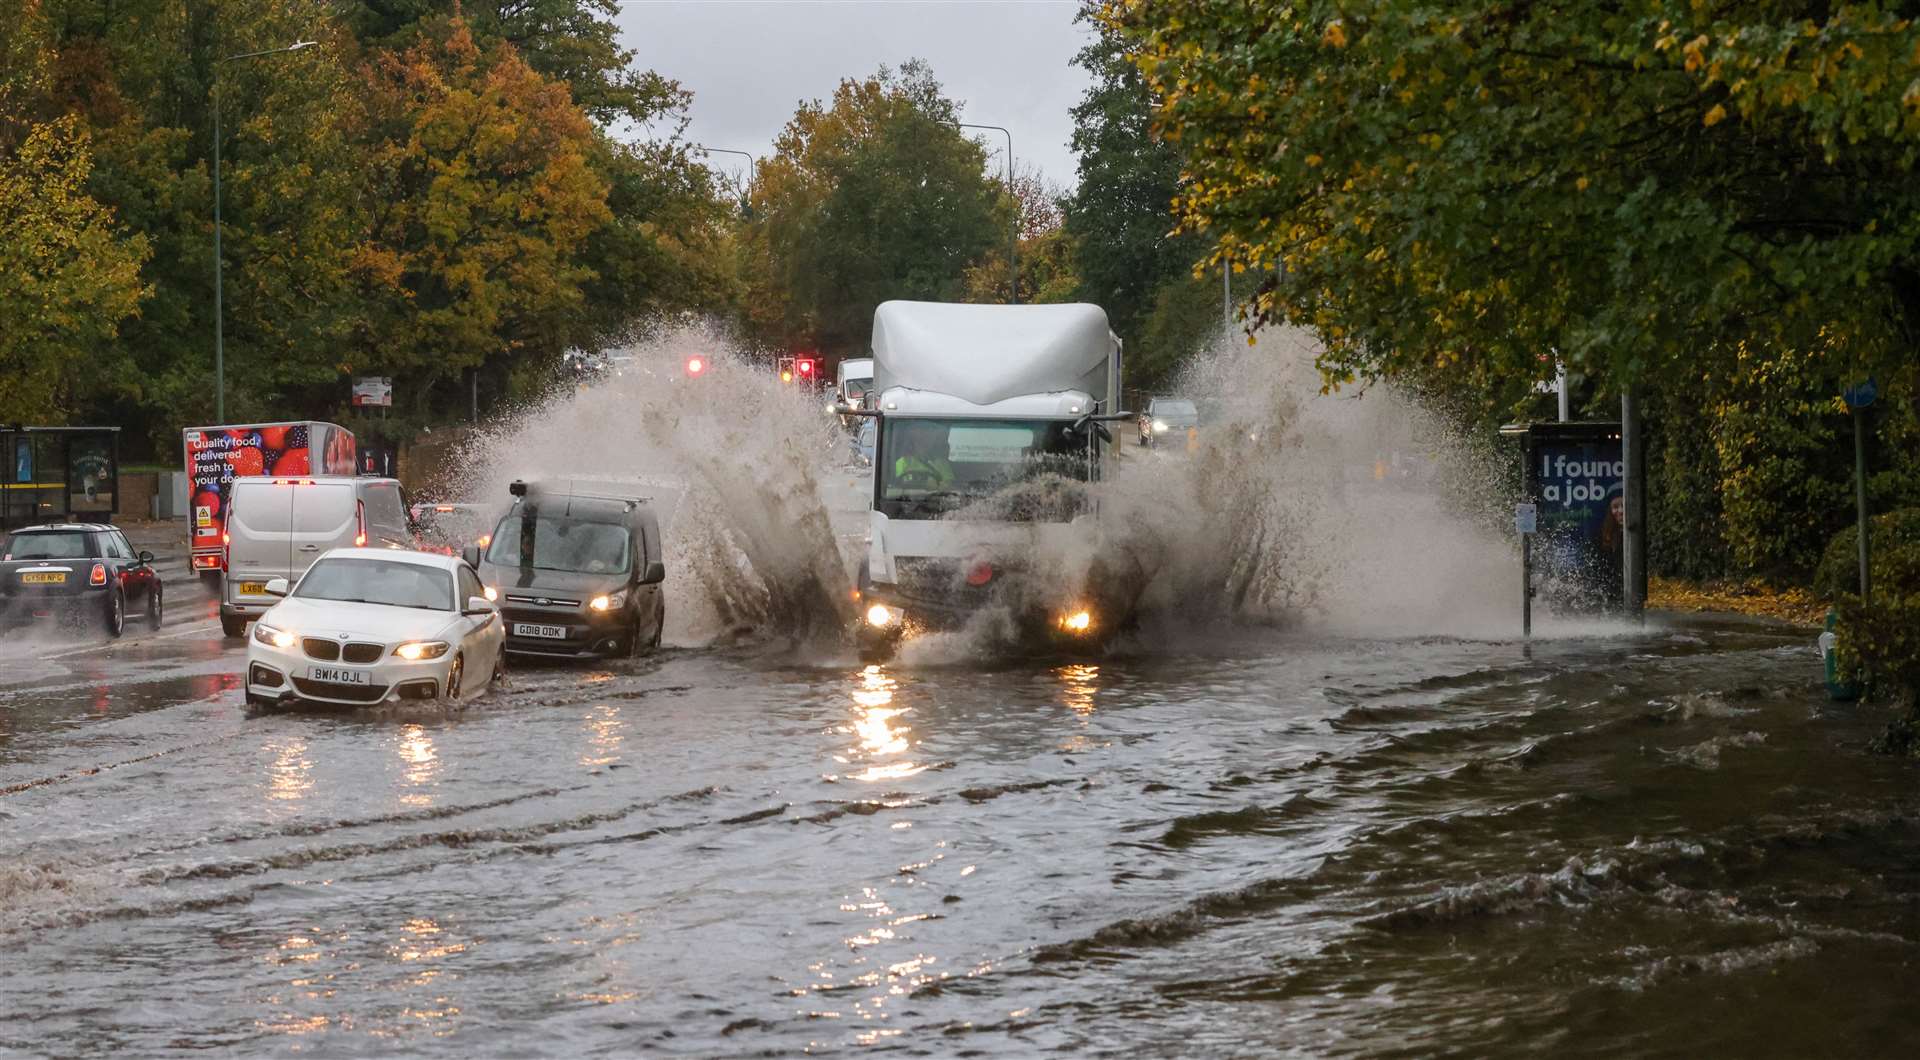 Multiple flood warnings have been issued for parts of Kent